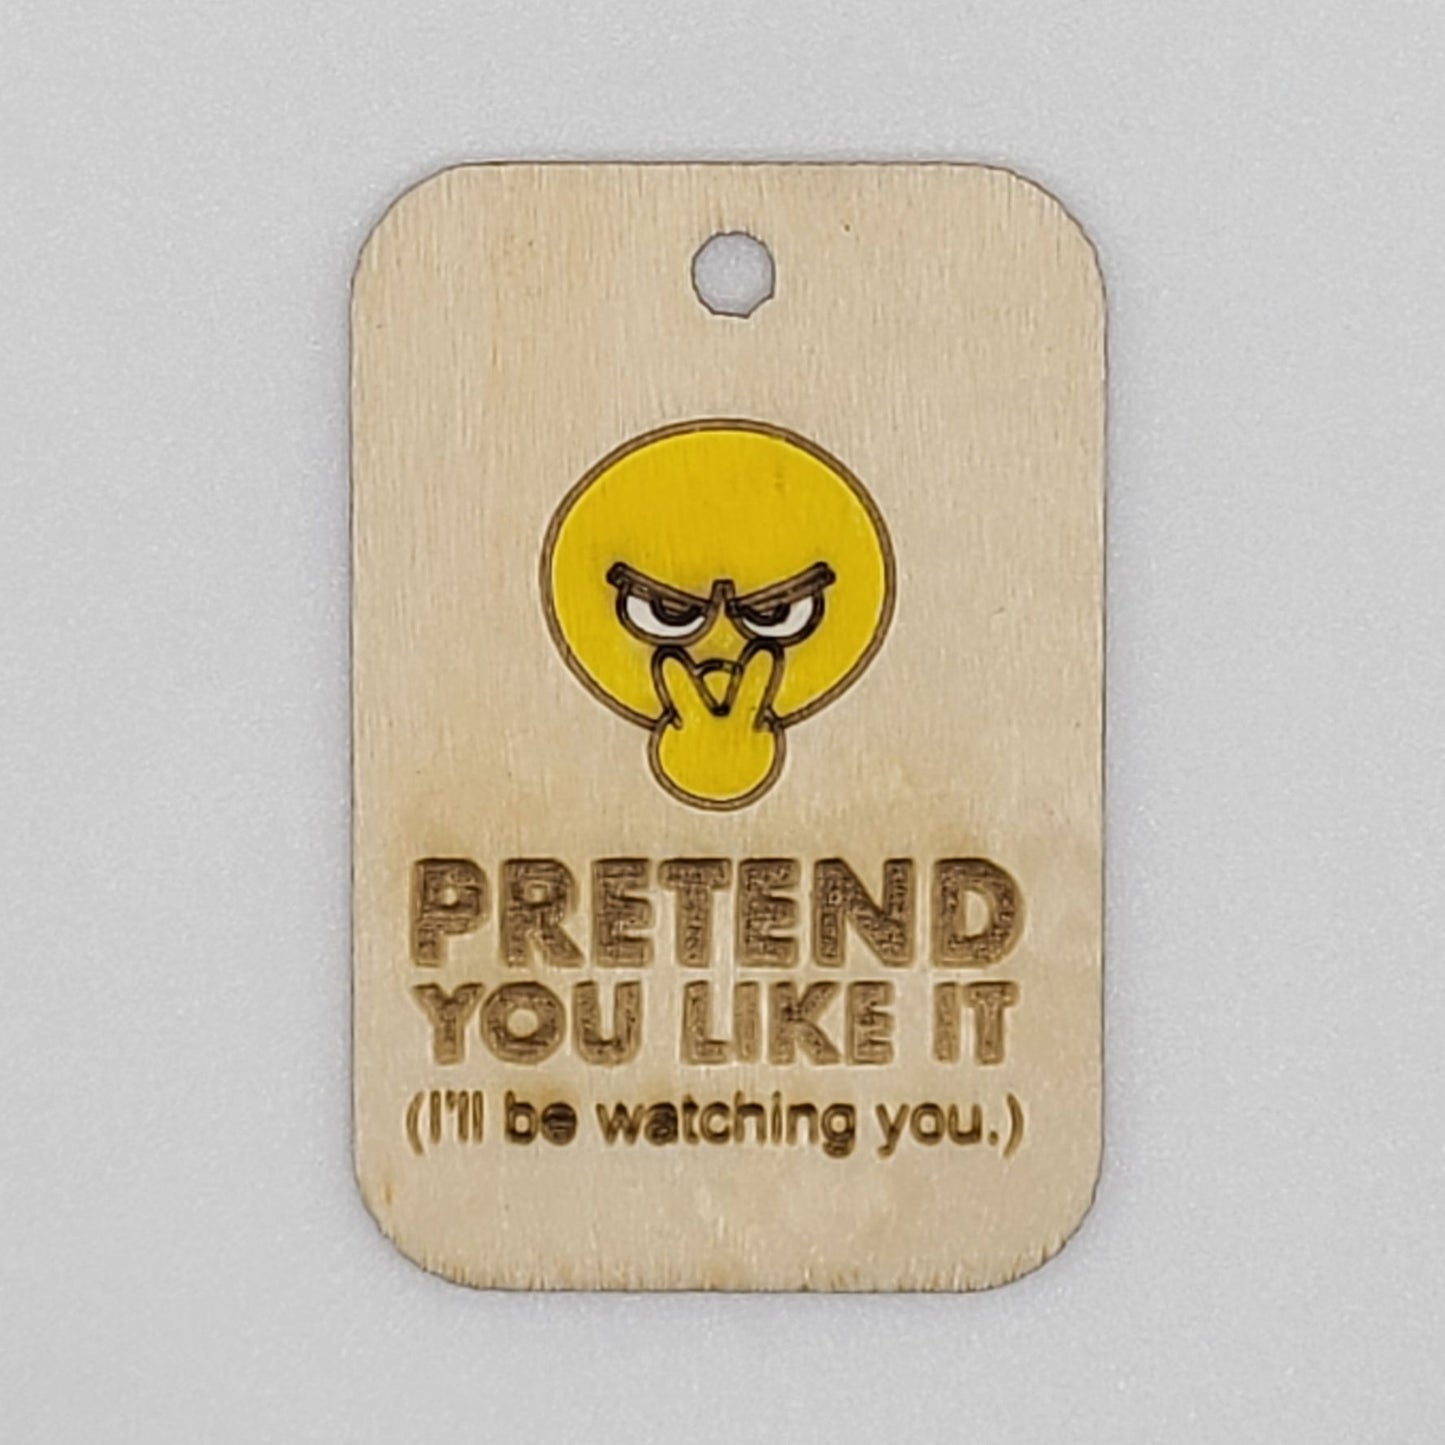 "Pretend You Like It" Gift Tag